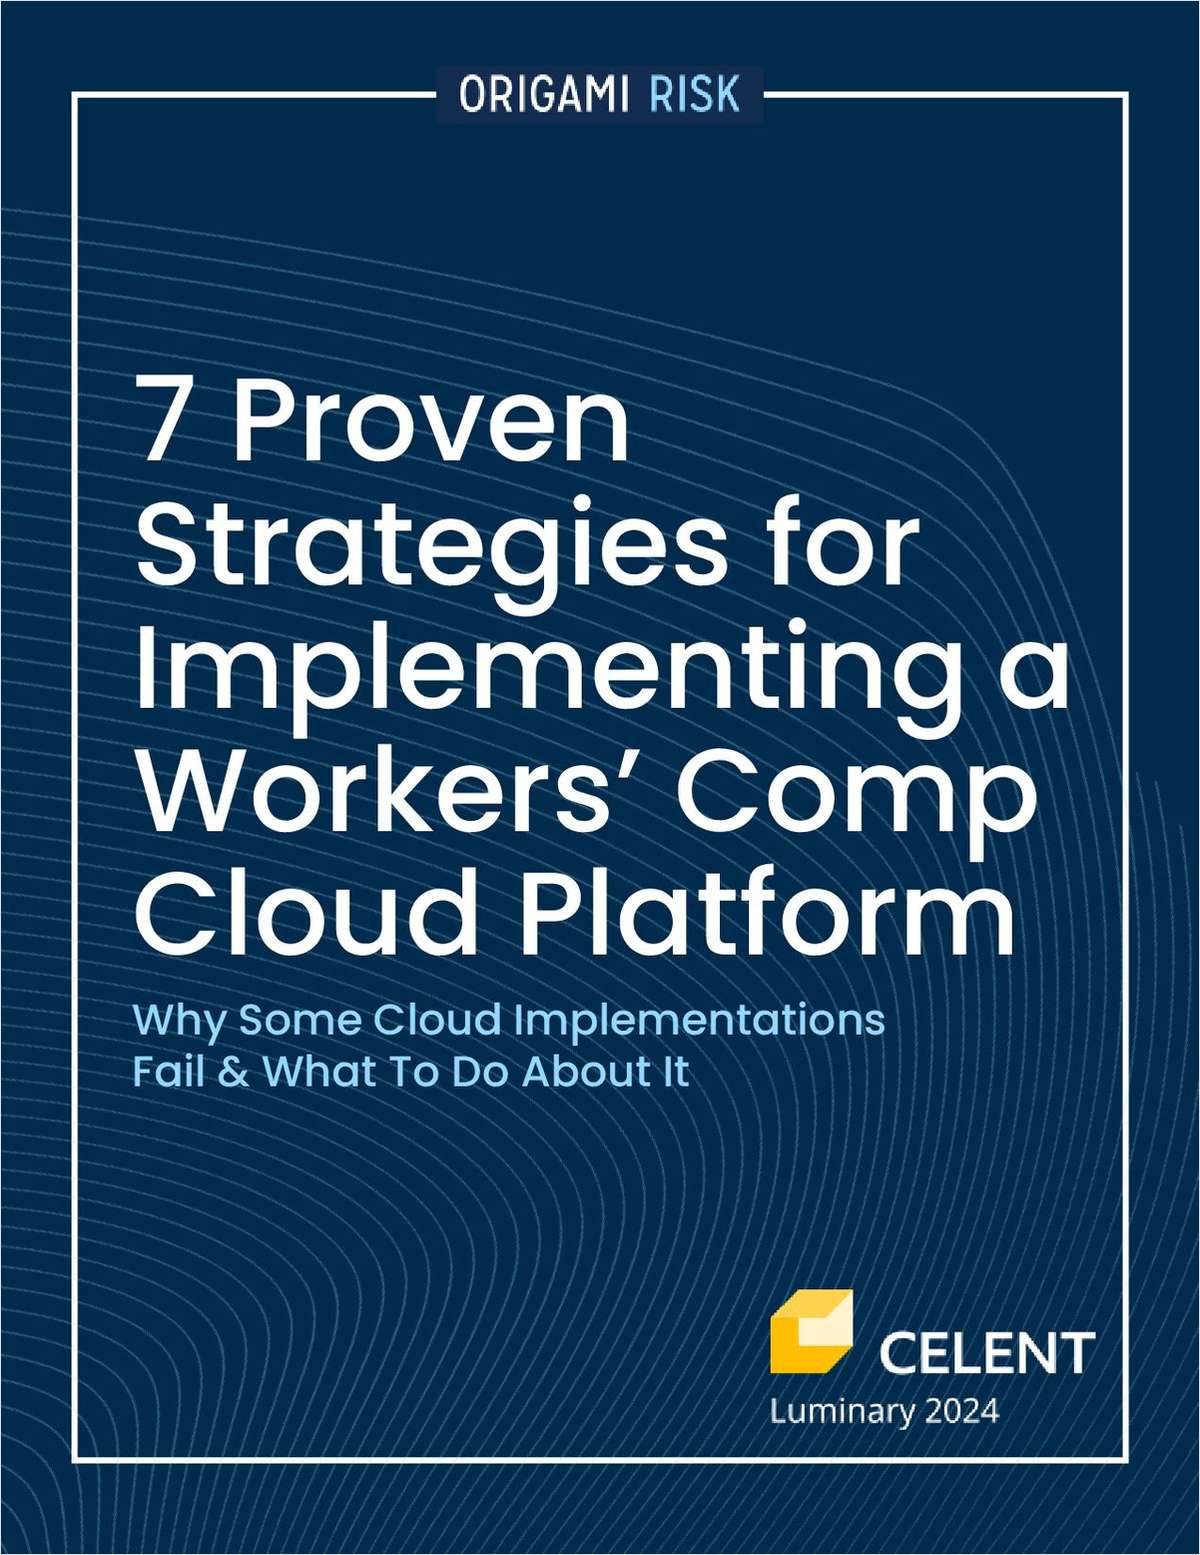 7 Proven Strategies for Implementing a Workers' Comp Cloud Platform